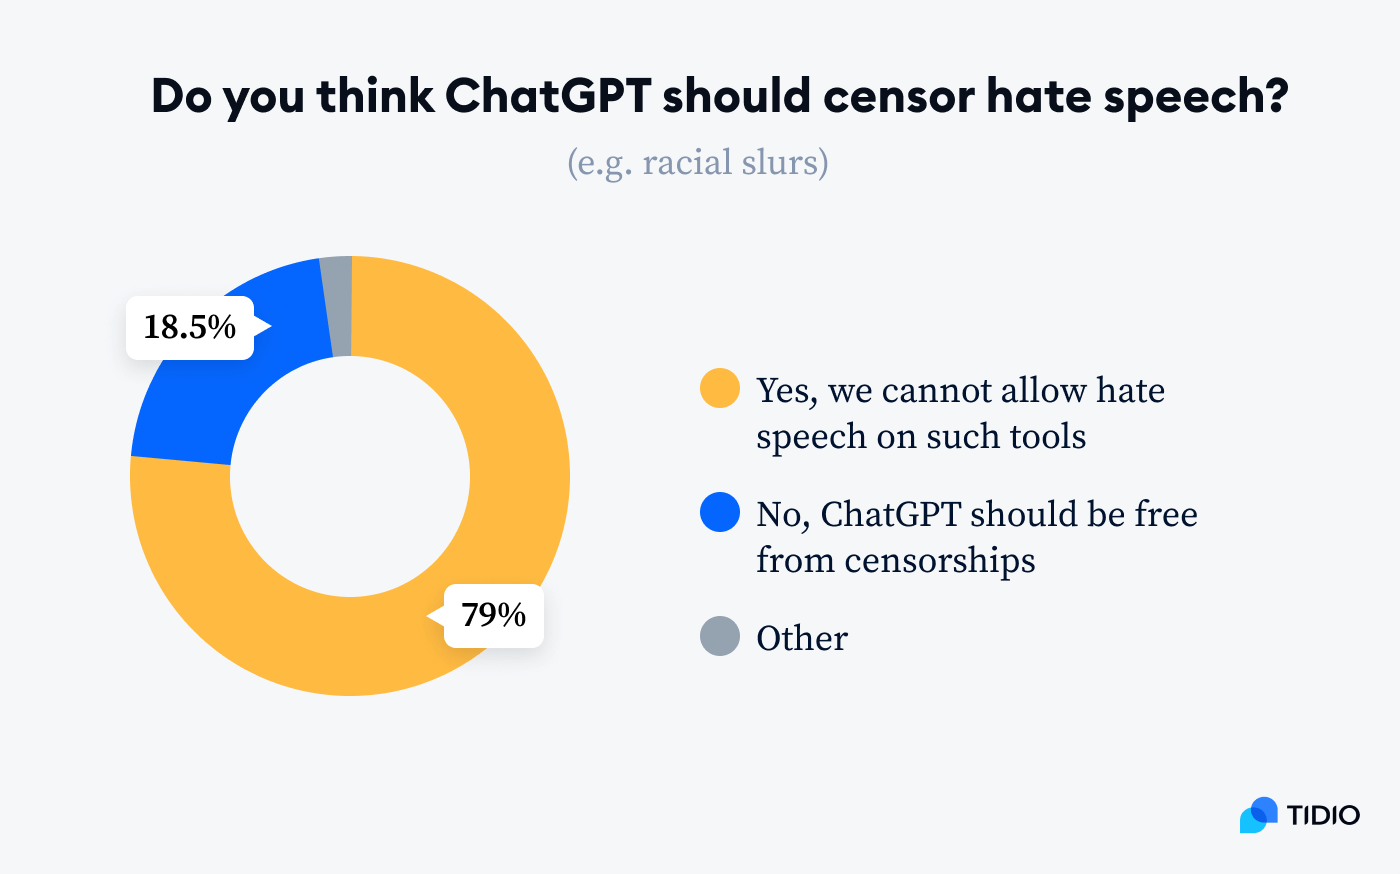 As many as 75% believe that ChatGPT should censor hate speech image